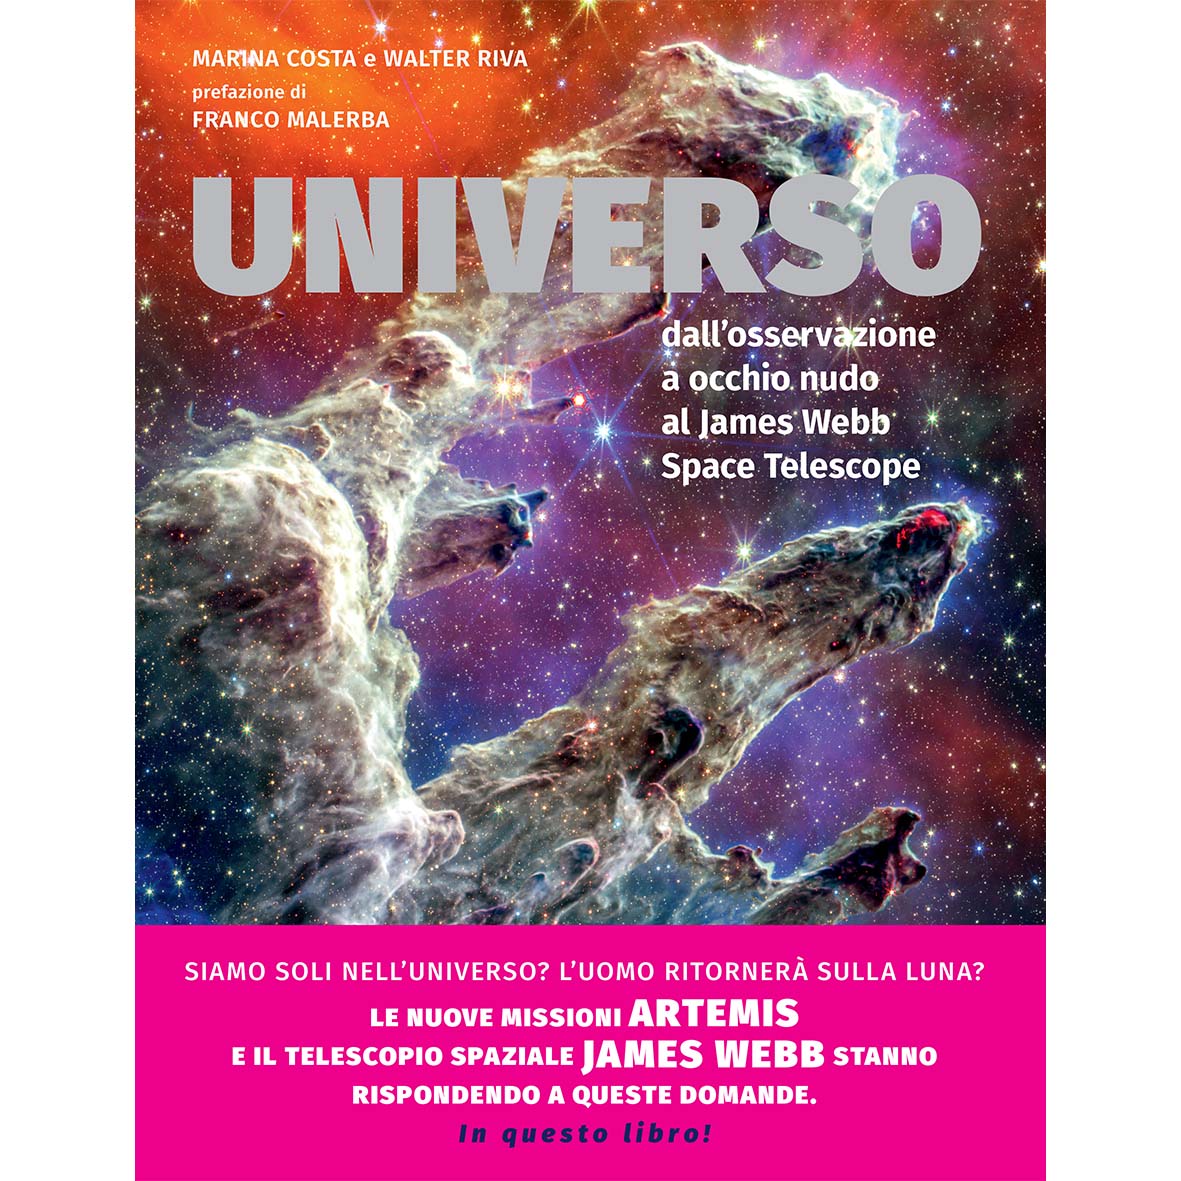 Universe - from naked eye observation to the James Webb Space Telescope (new edition)